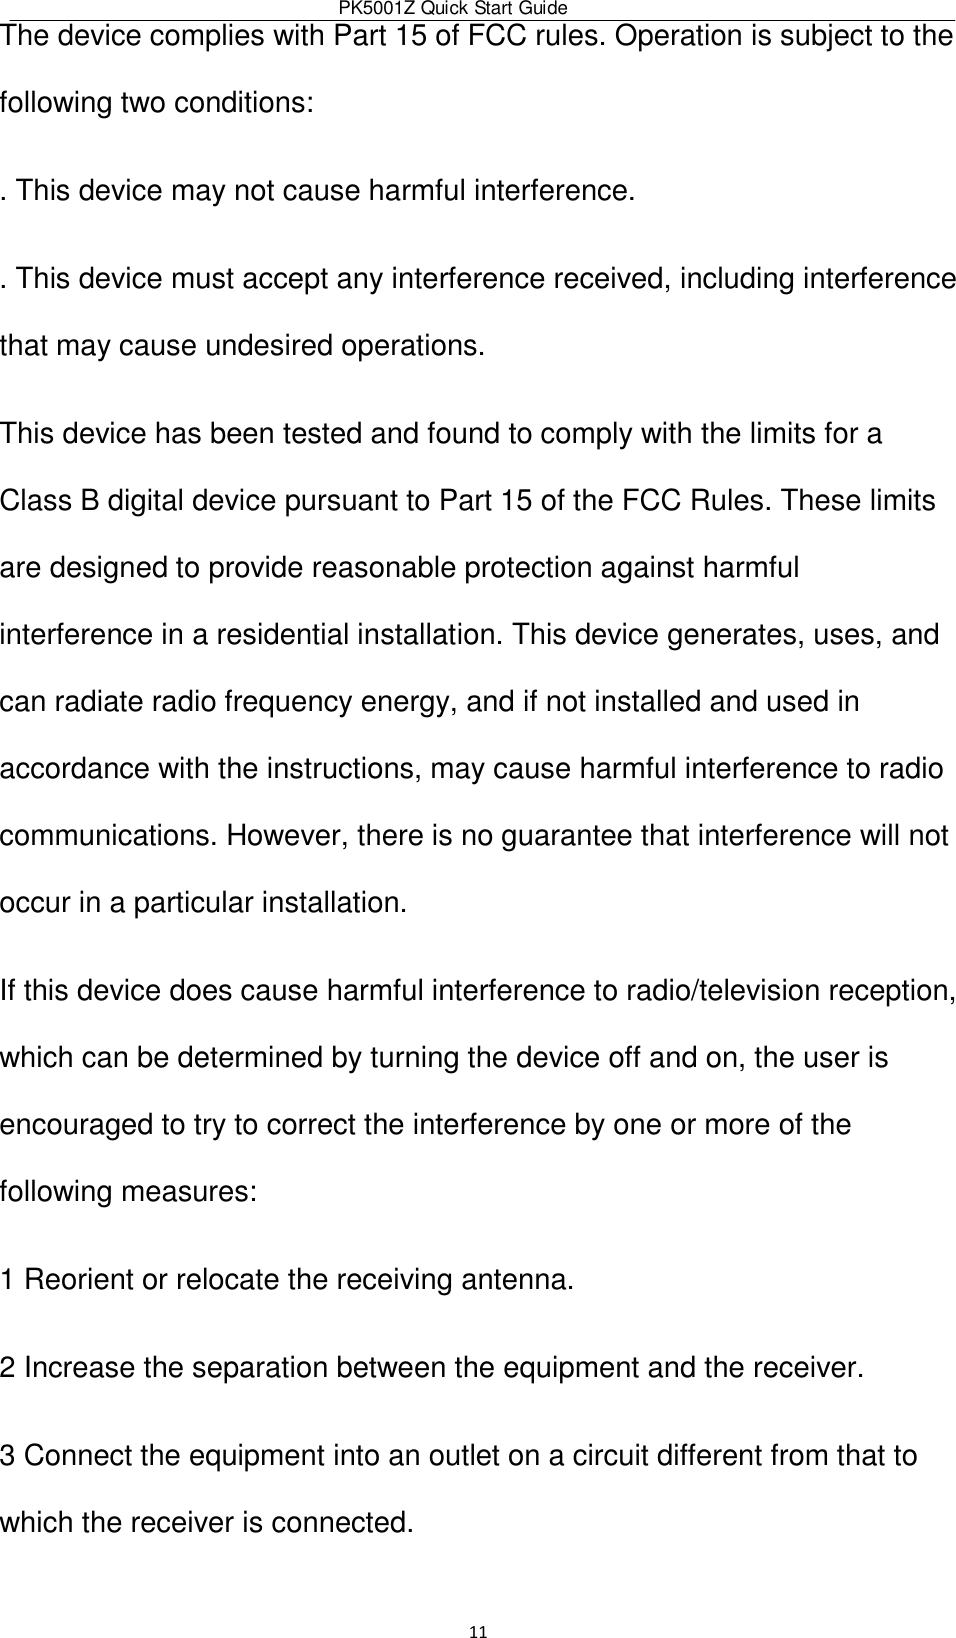 PK5001Z Quick Start Guide  11  The device complies with Part 15 of FCC rules. Operation is subject to the following two conditions:  . This device may not cause harmful interference.  . This device must accept any interference received, including interference that may cause undesired operations.  This device has been tested and found to comply with the limits for a Class B digital device pursuant to Part 15 of the FCC Rules. These limits are designed to provide reasonable protection against harmful interference in a residential installation. This device generates, uses, and can radiate radio frequency energy, and if not installed and used in accordance with the instructions, may cause harmful interference to radio communications. However, there is no guarantee that interference will not occur in a particular installation.  If this device does cause harmful interference to radio/television reception, which can be determined by turning the device off and on, the user is encouraged to try to correct the interference by one or more of the following measures:  1 Reorient or relocate the receiving antenna.  2 Increase the separation between the equipment and the receiver.  3 Connect the equipment into an outlet on a circuit different from that to which the receiver is connected.  